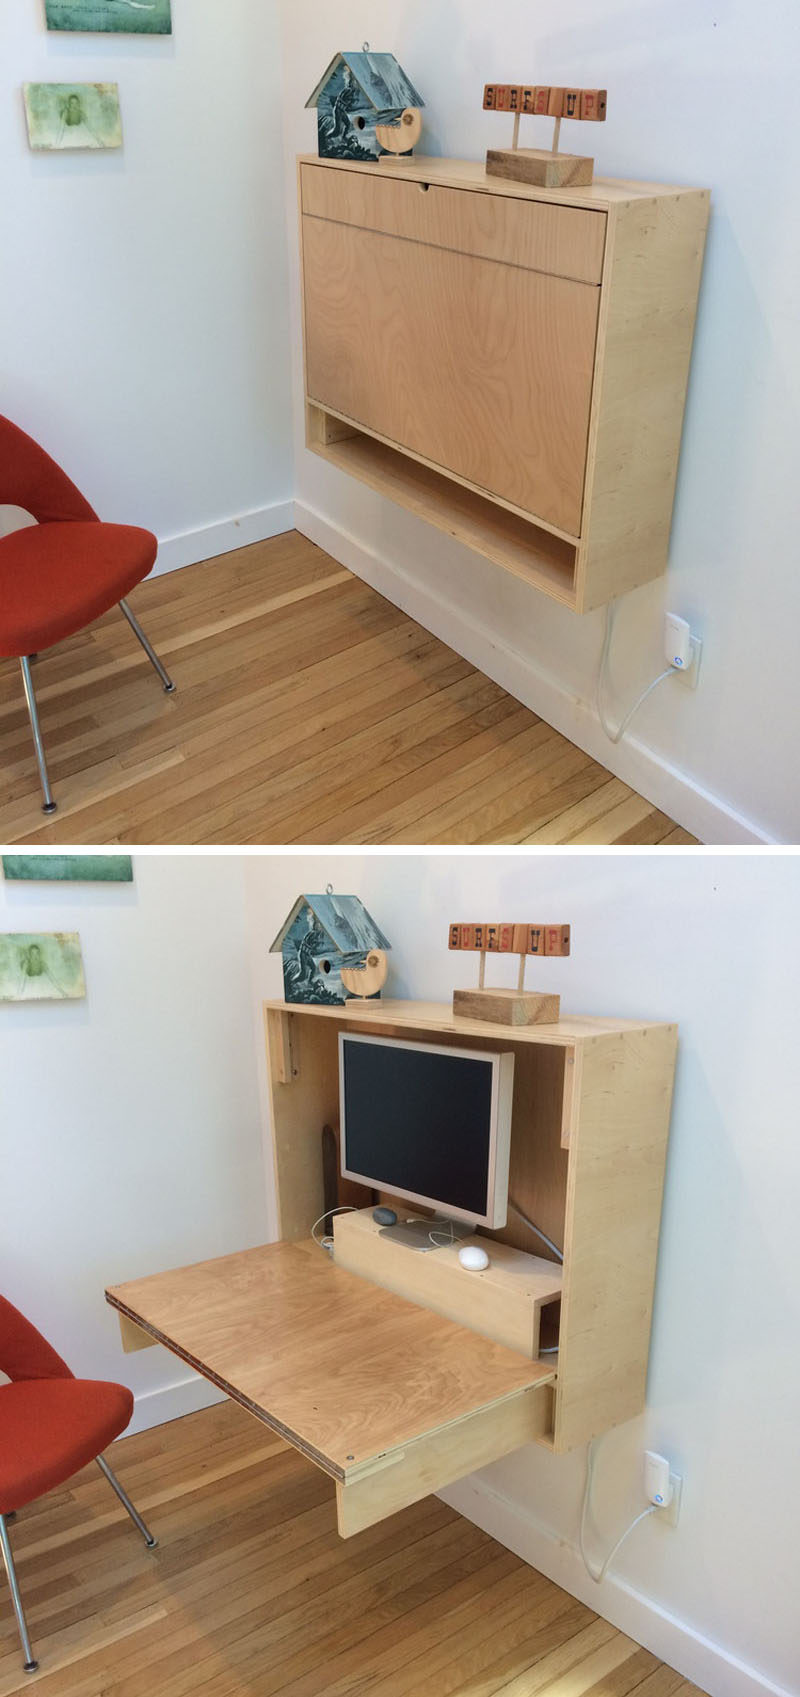 16 Wall Desk Ideas That Are Great For Small Spaces // If you're feeling ambitious you can also make your own custom fold up wall desk like this one to make sure it fits all of your needs.